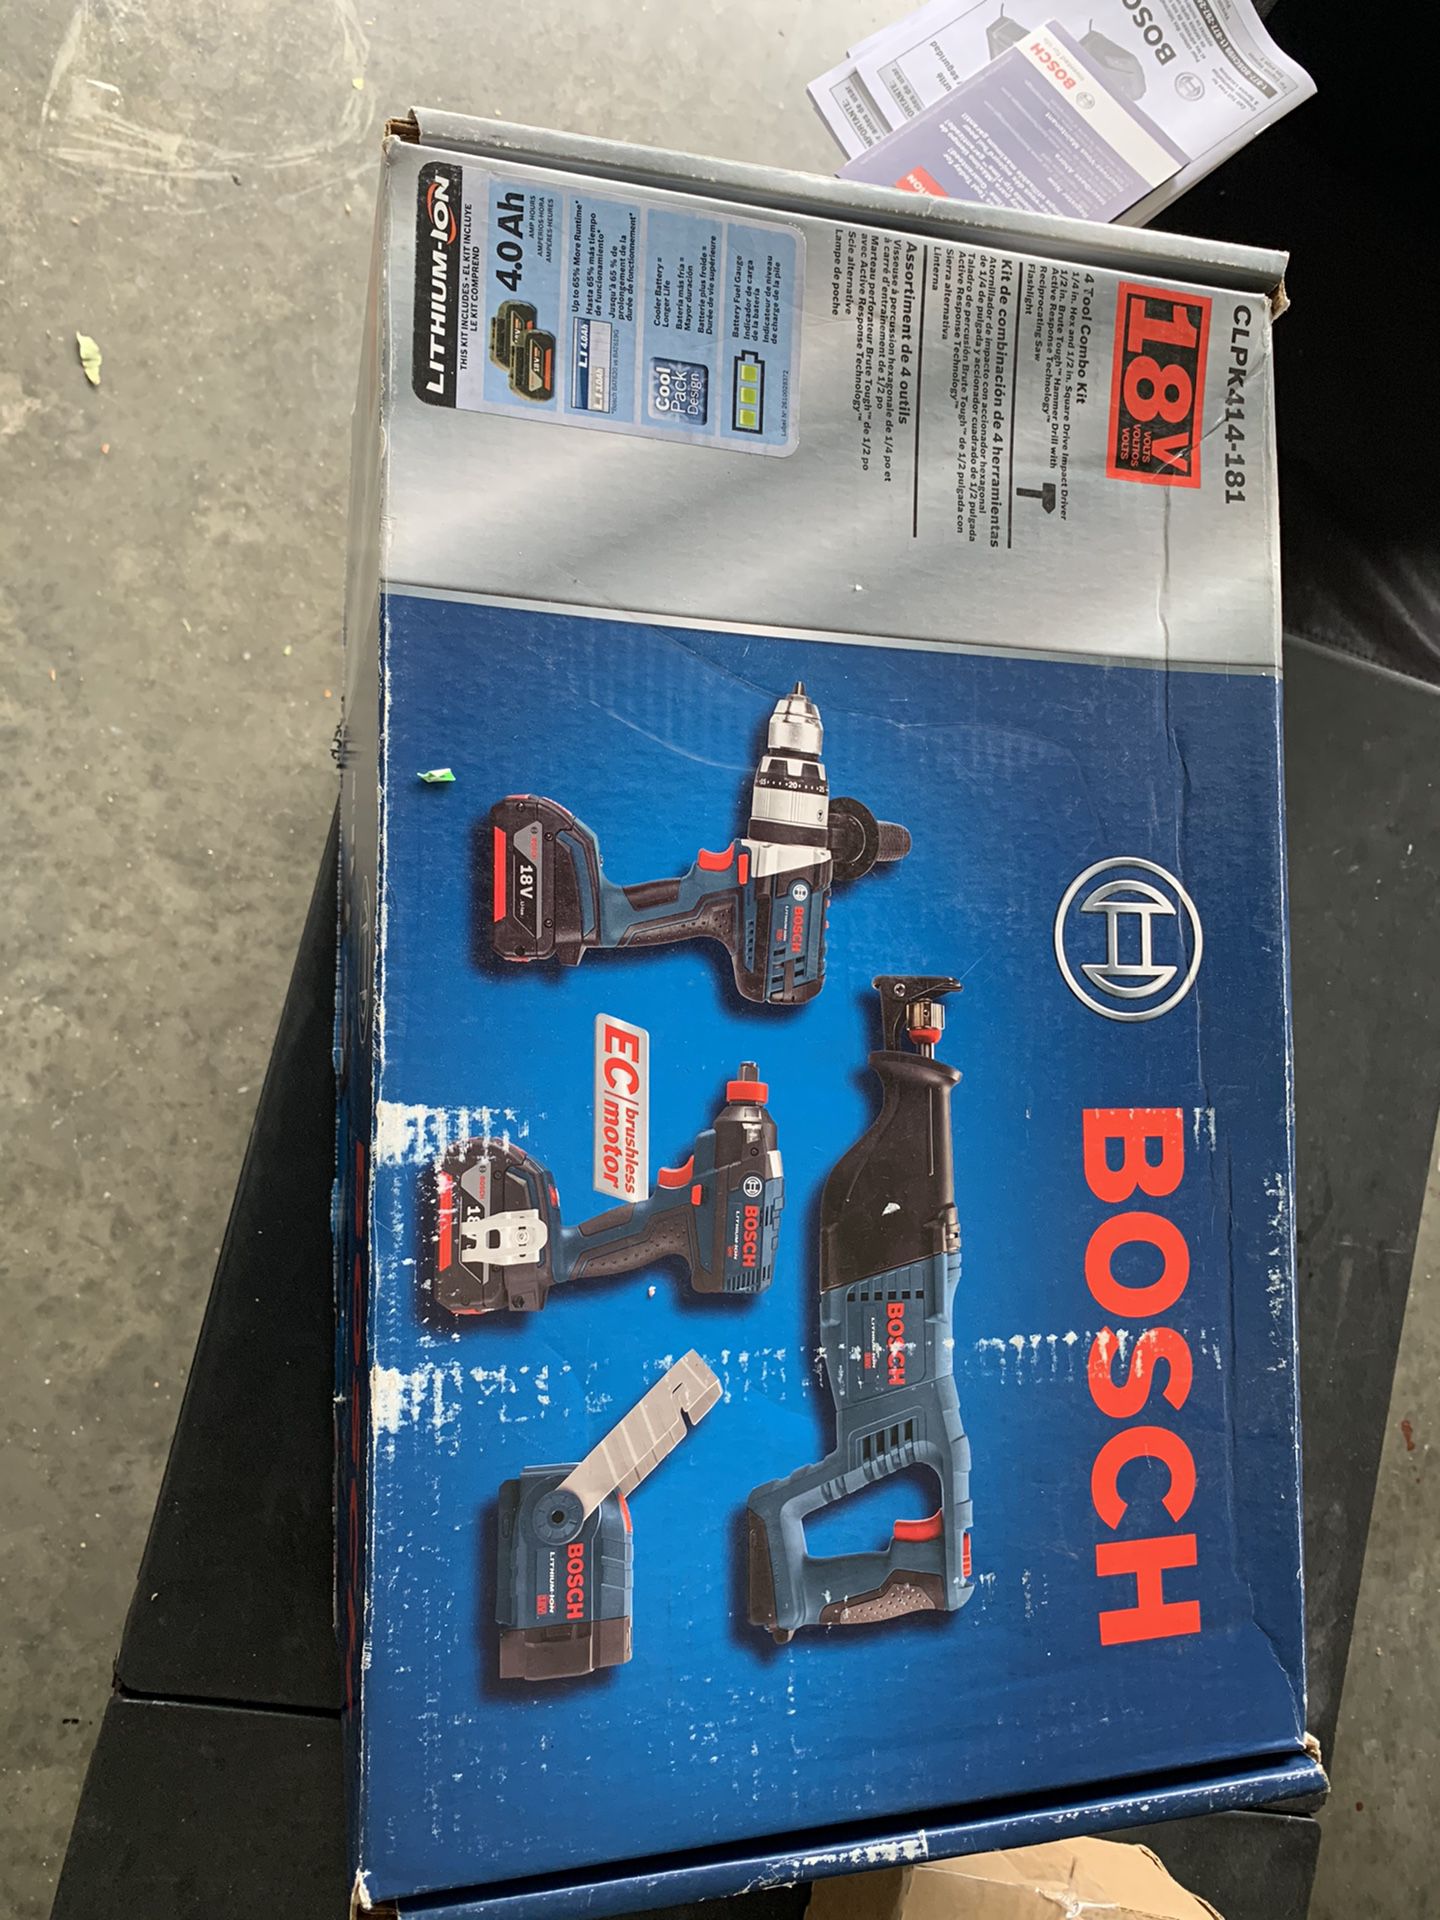 Bosch 18v combo 1/2 hammer driver drill & Socket impact driver & Sawzall and light with 2 batteries 4.0 ah an charger!